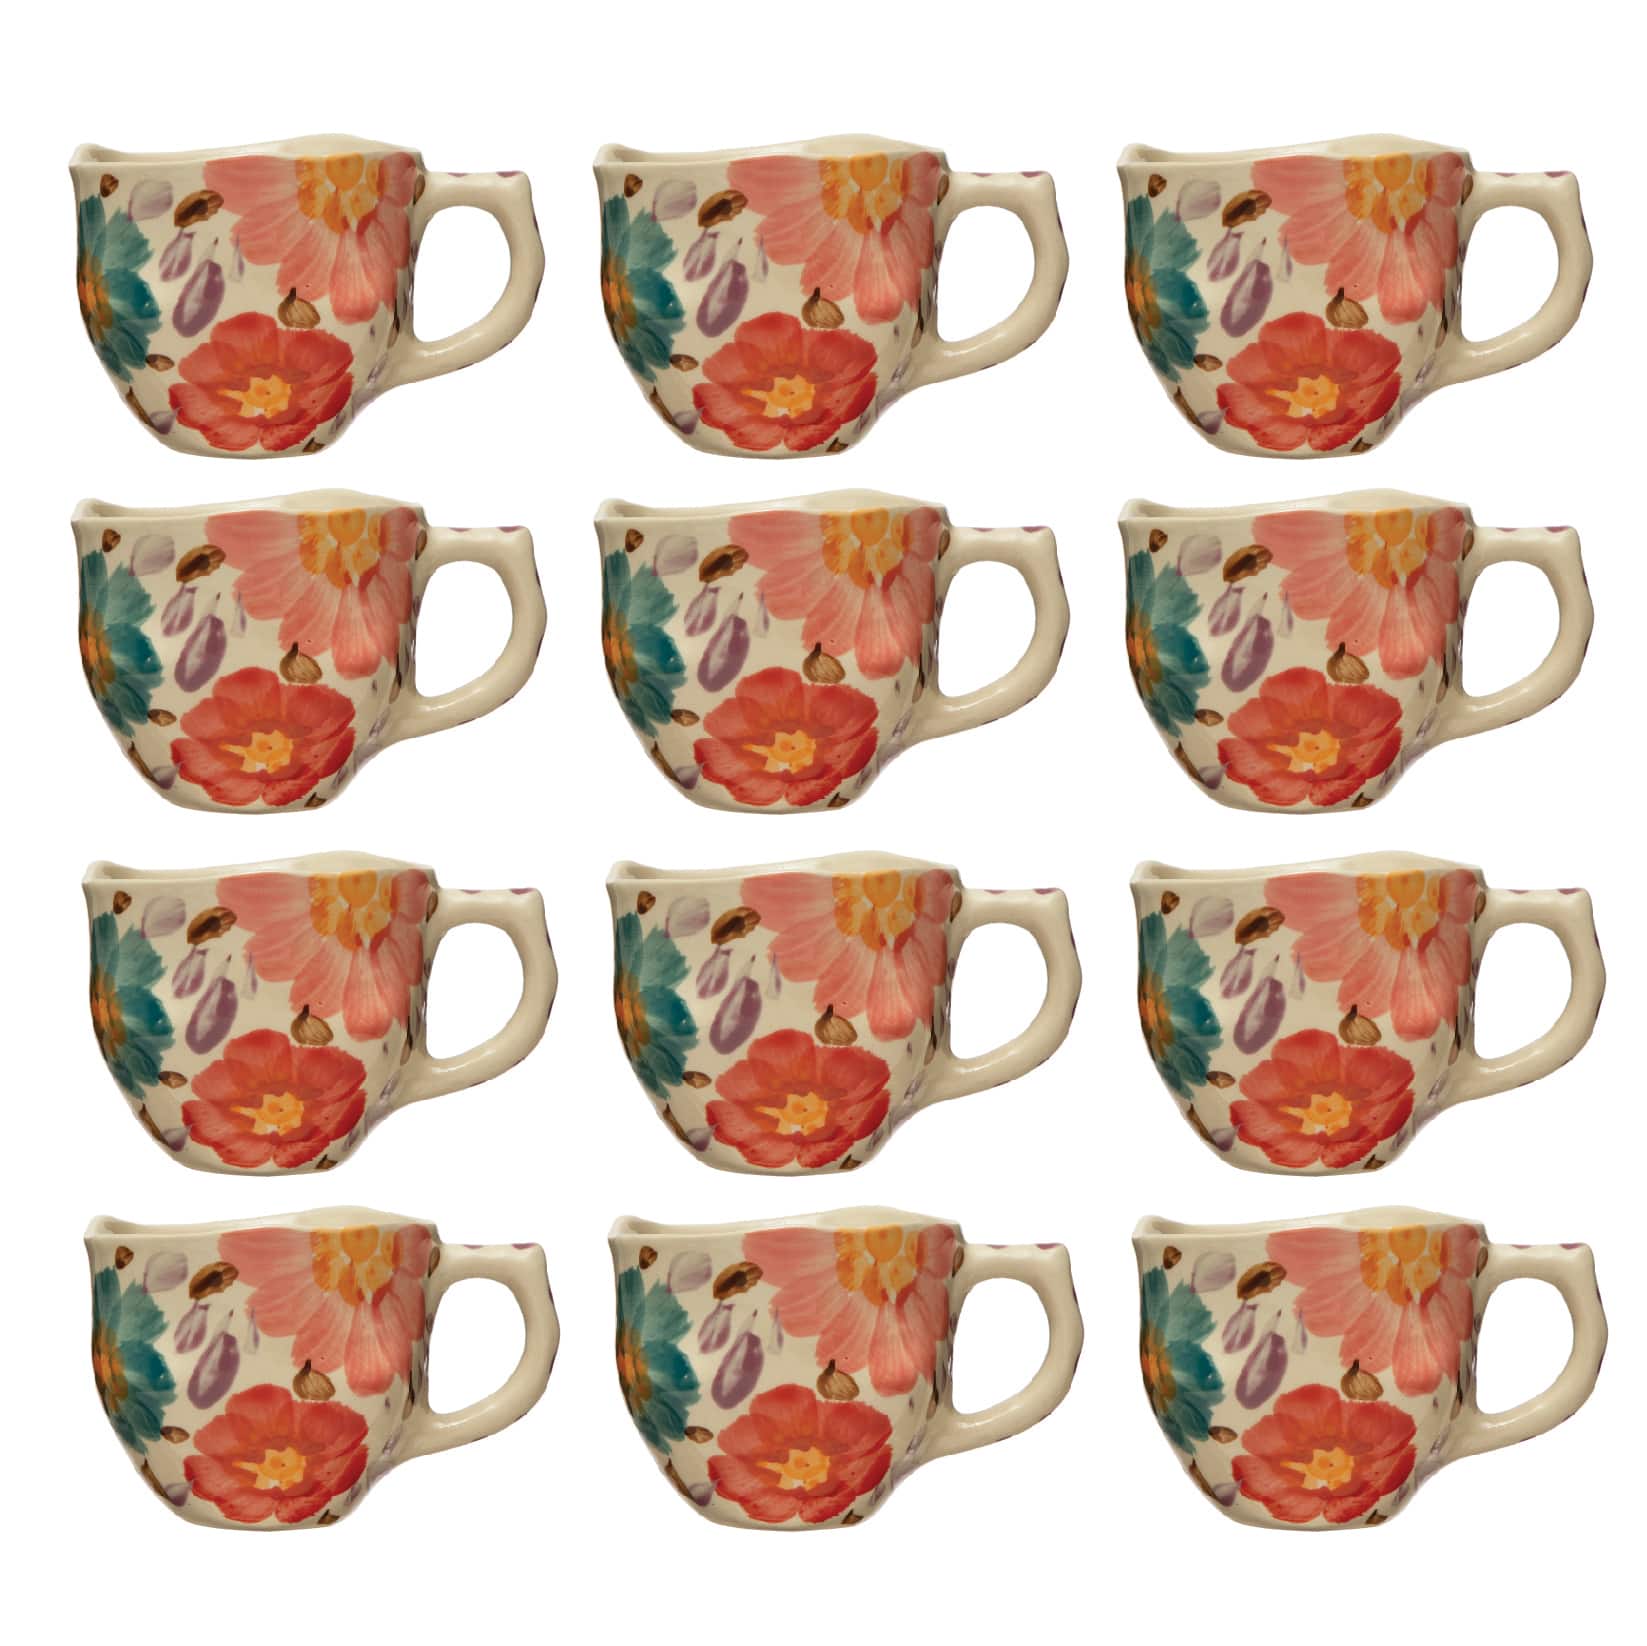 8oz. Multicolor Organically Shaped Edge Stoneware Mug Set with Painted Florals